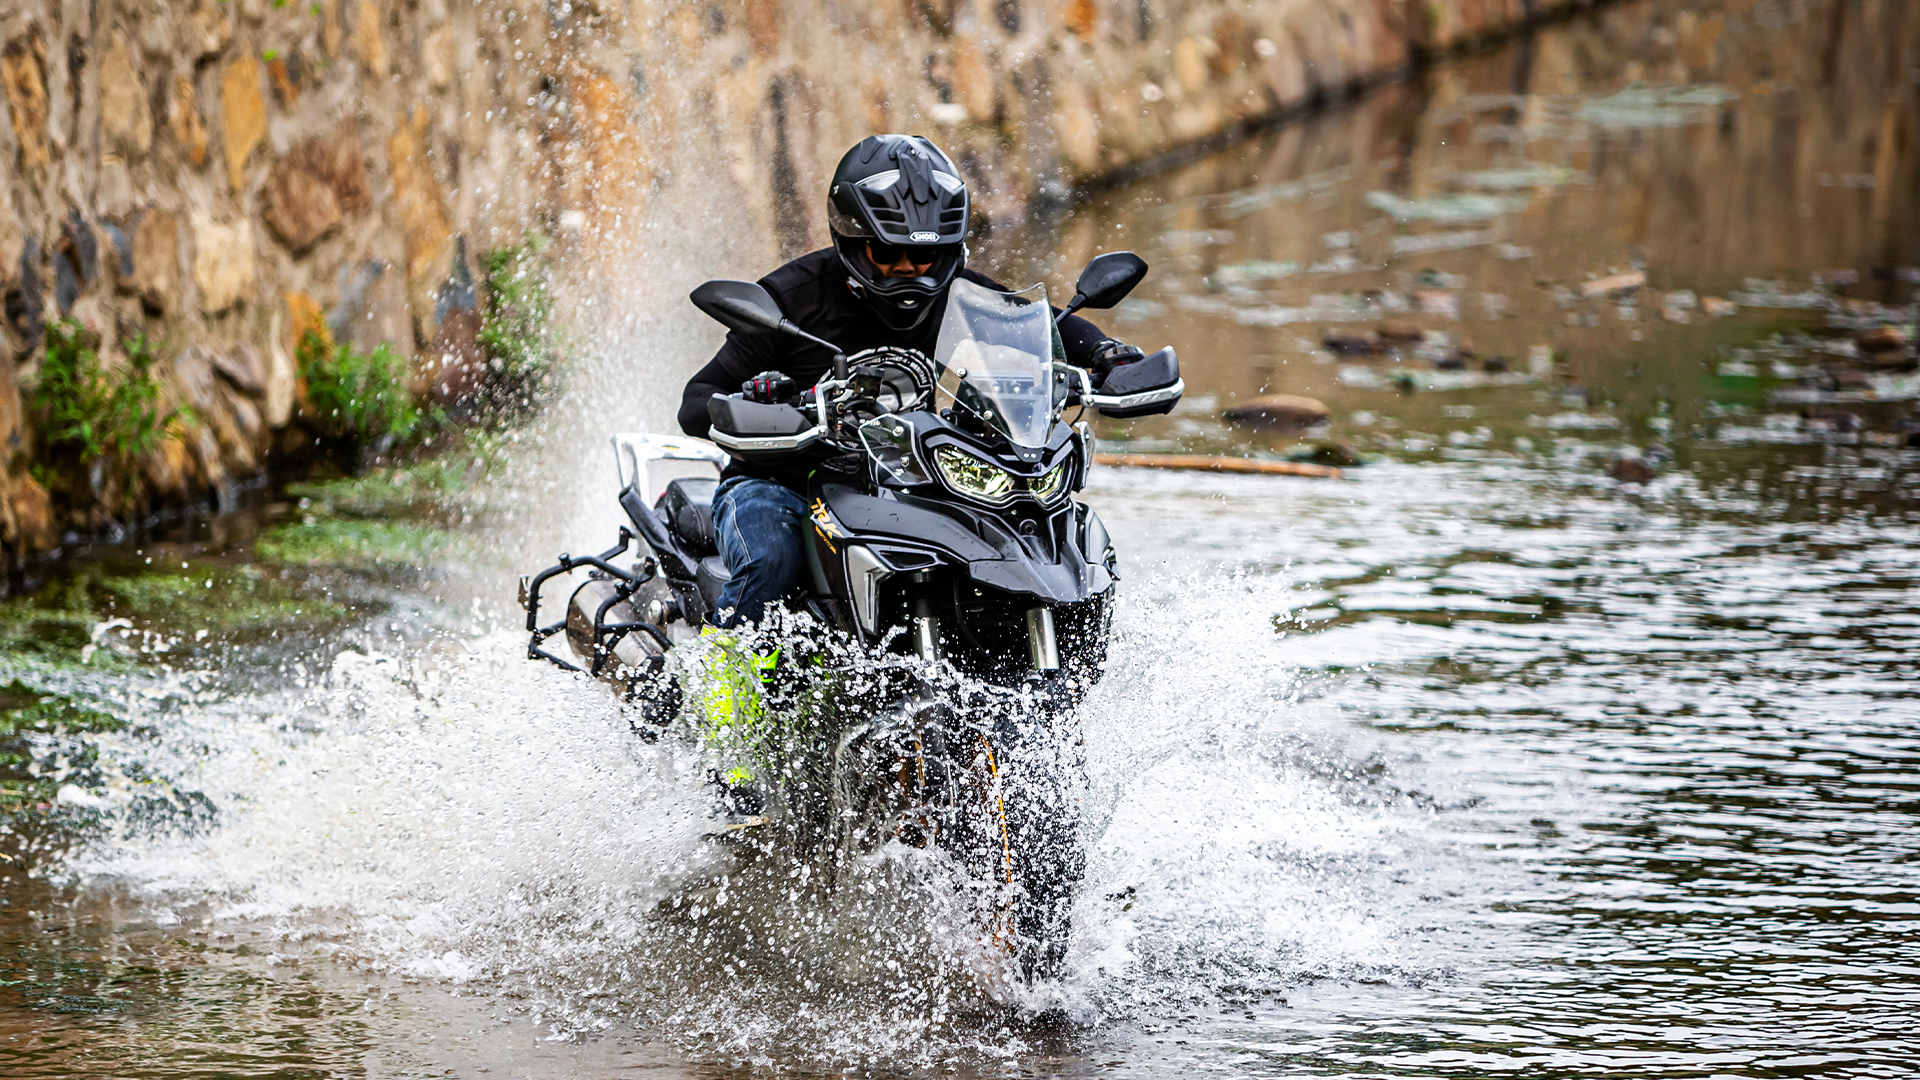 Benelli TRK702 action shot crossing a shallow river